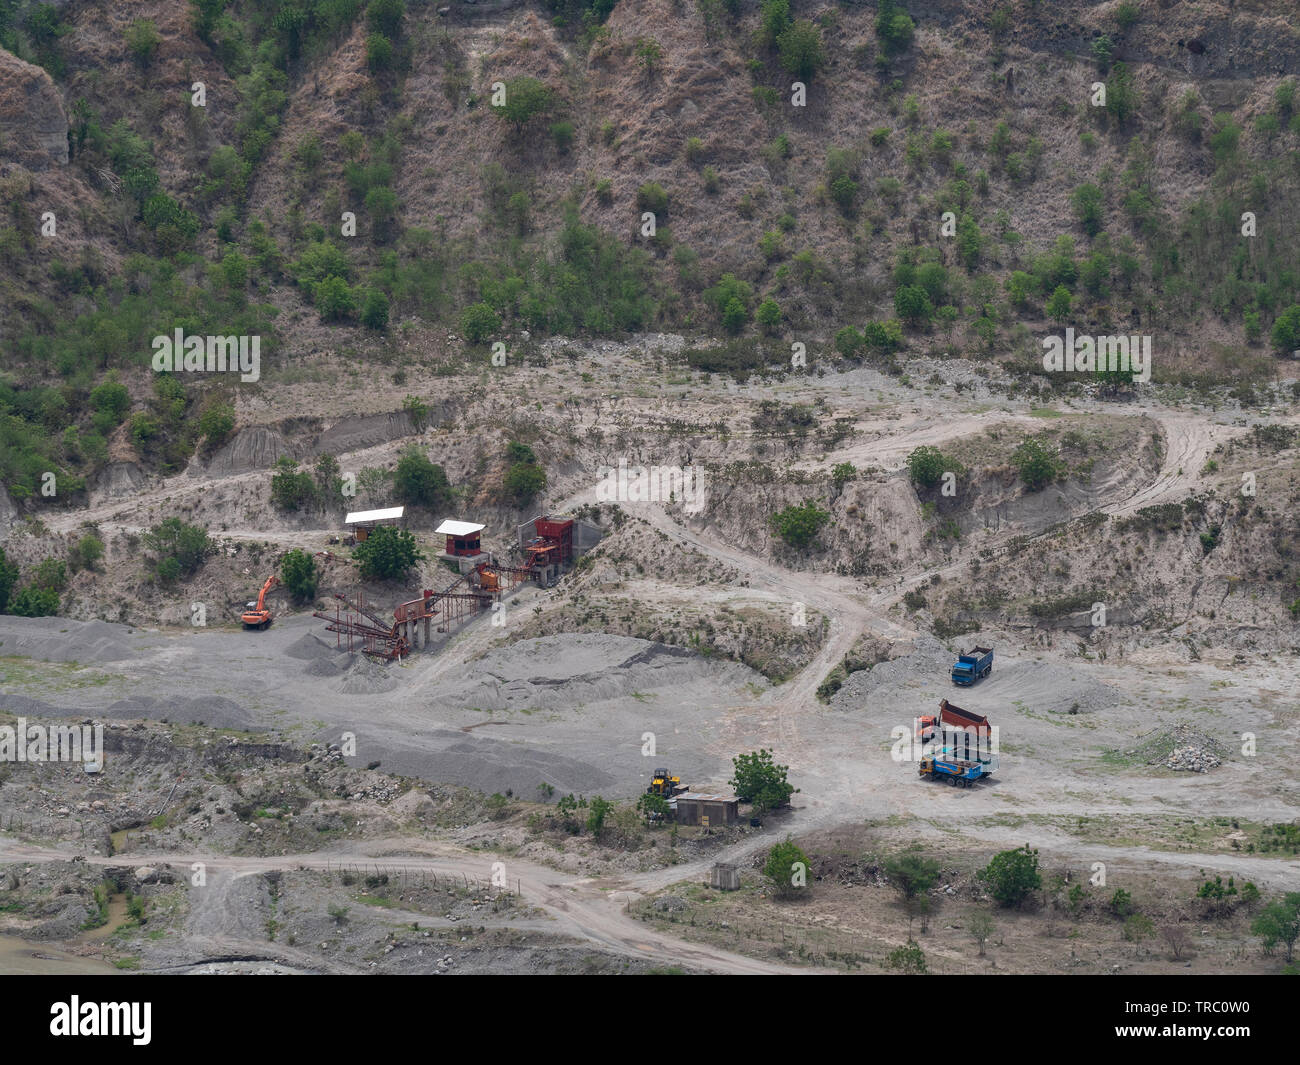 Aerial photo of quarry in the Philippines with trucks and production equipment Stock Photo